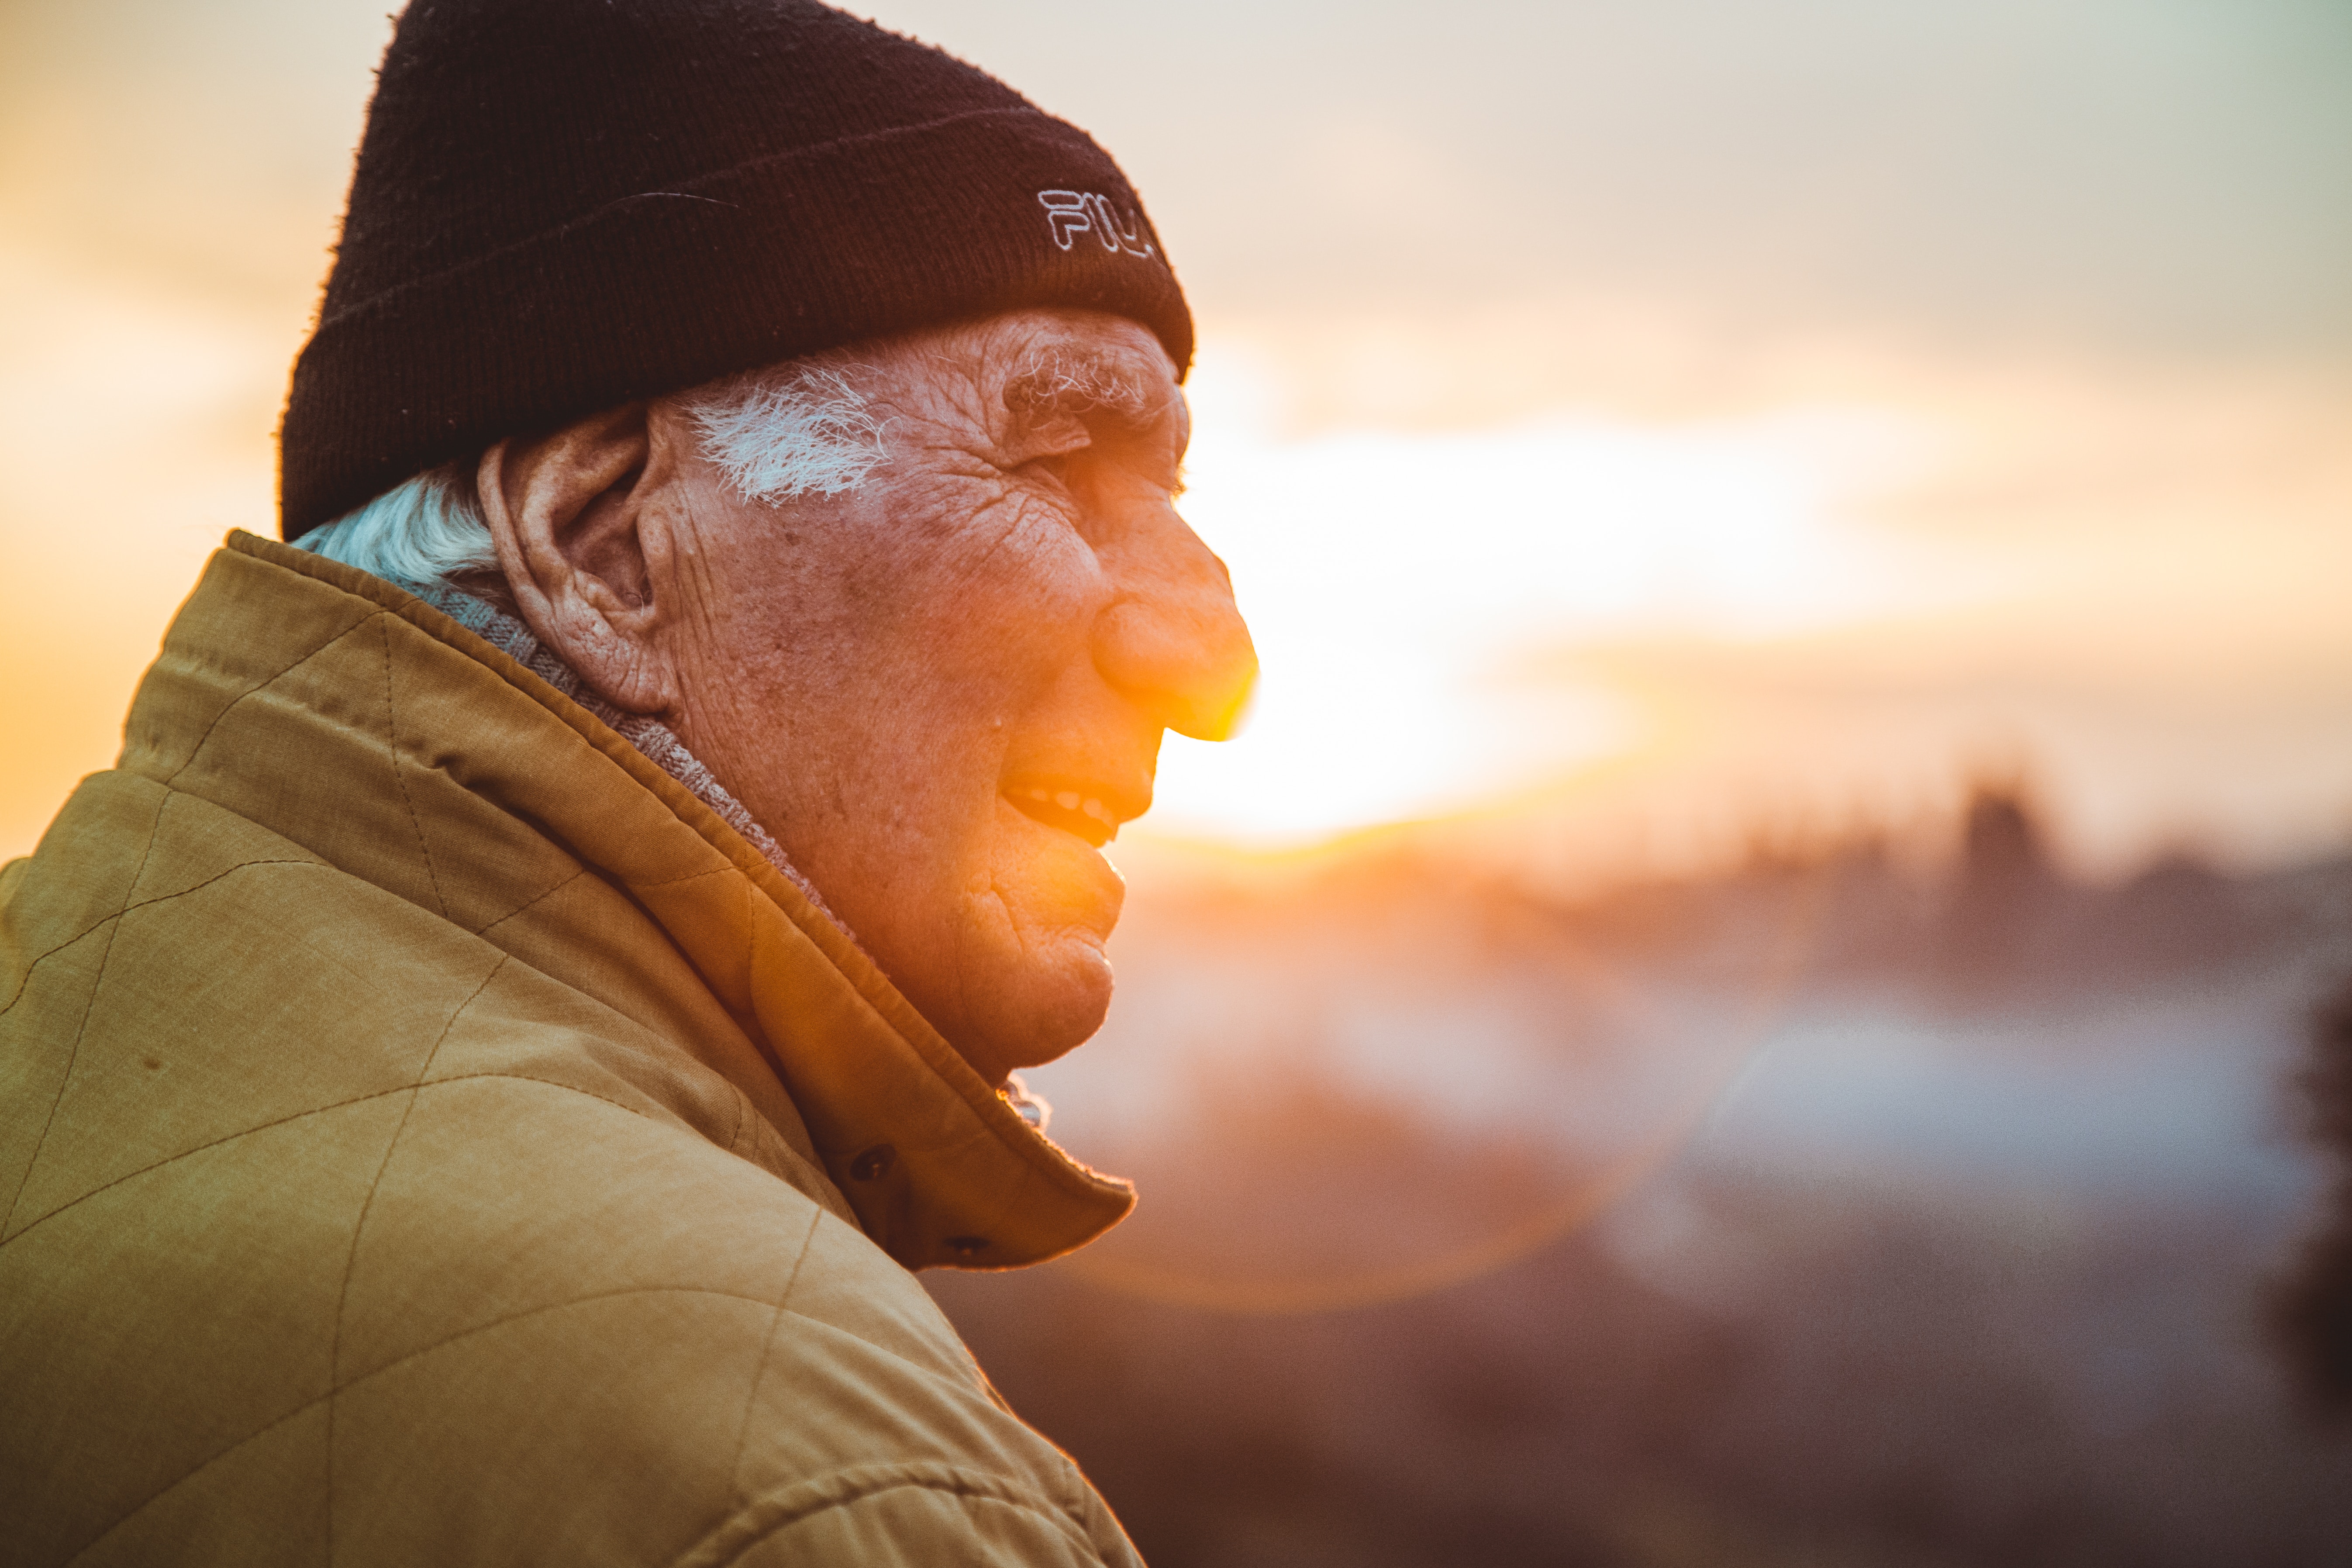 An elderly man during golden hour in the United States.